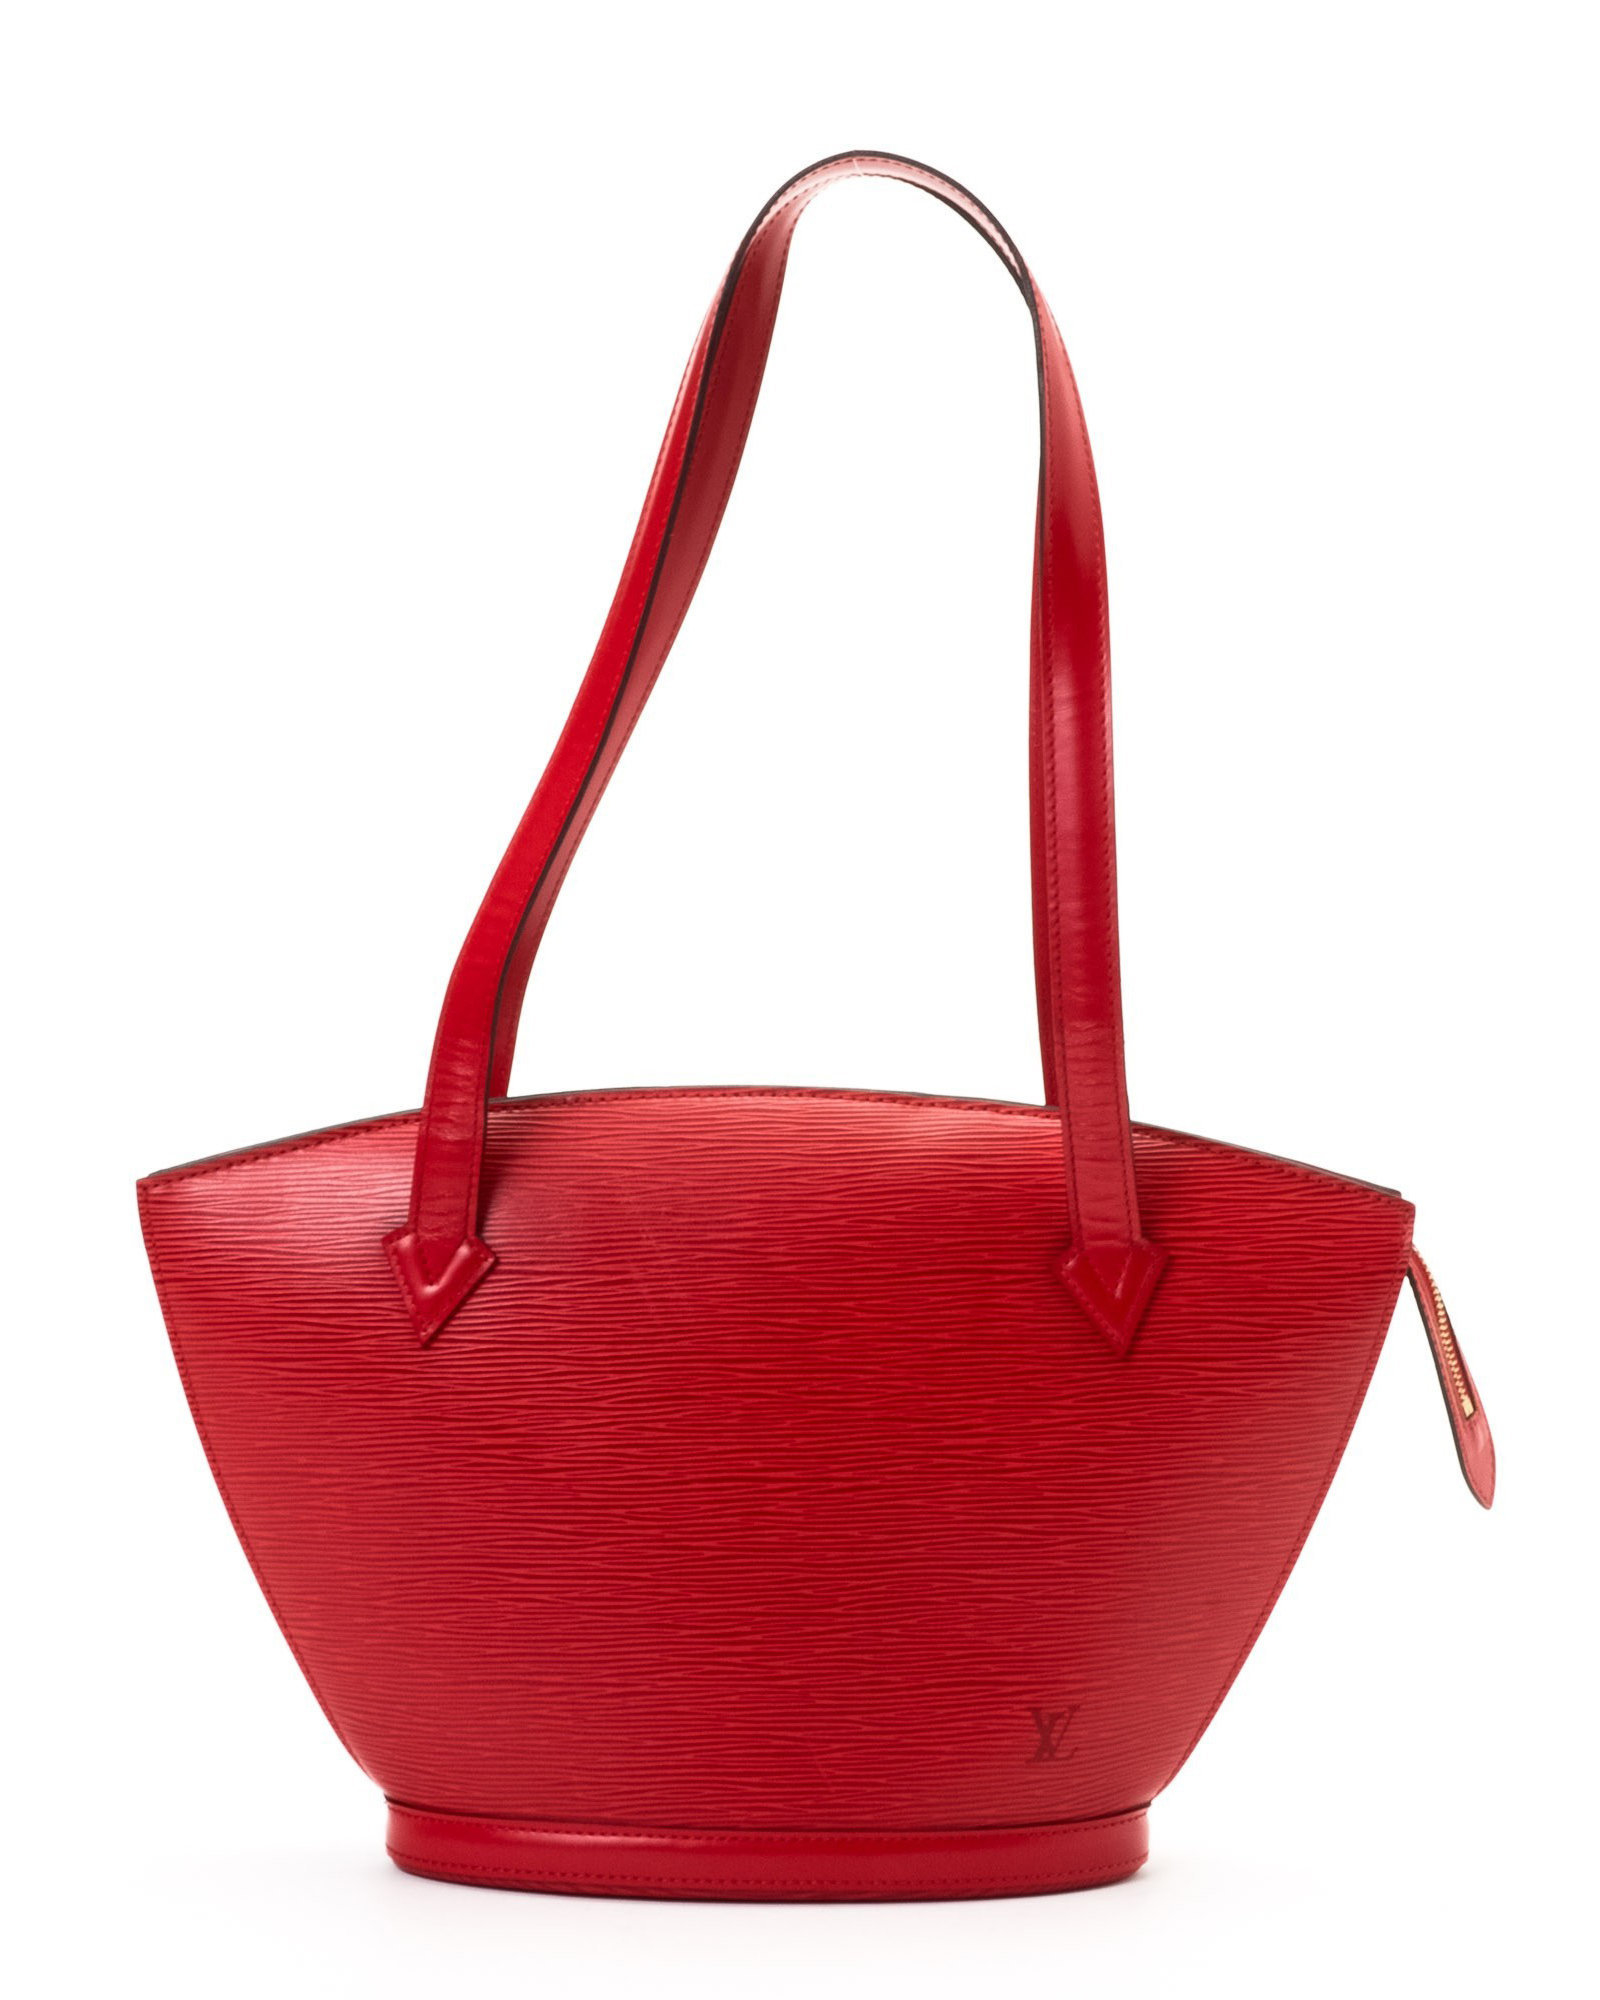 Lyst - Louis Vuitton Red Tote Bag - Vintage in Blue